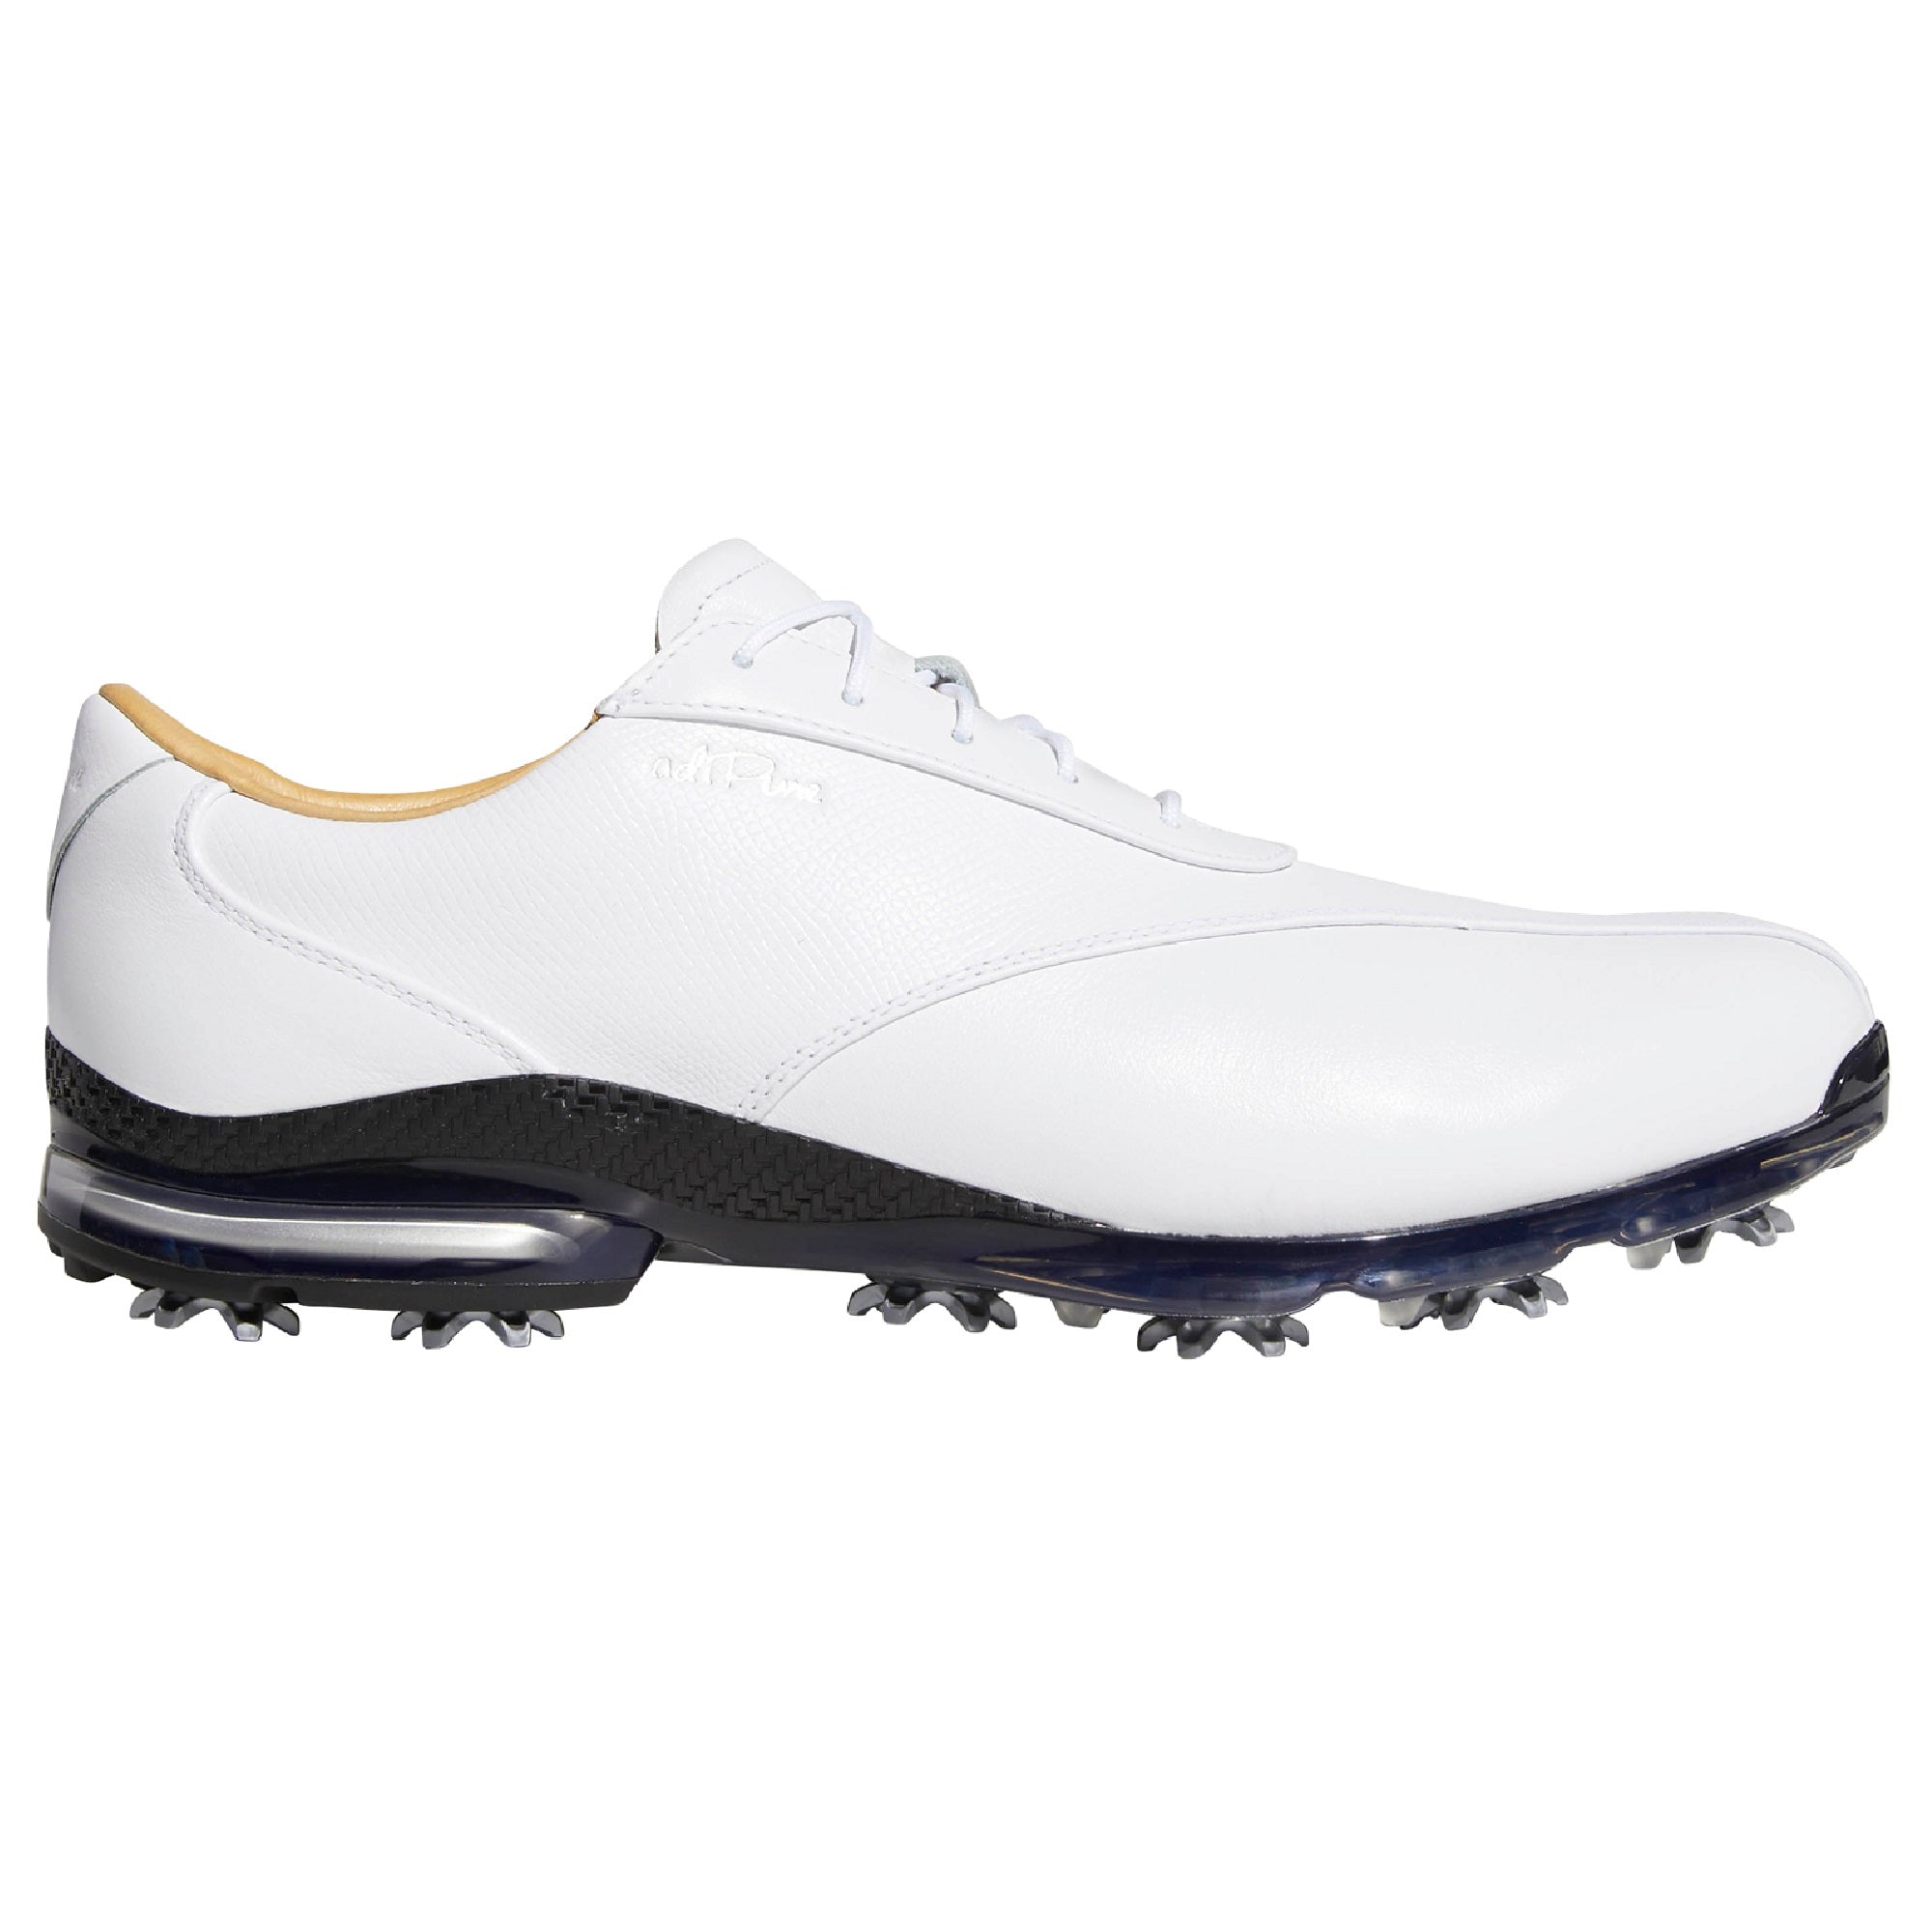 adidas adipure tp golf shoes review